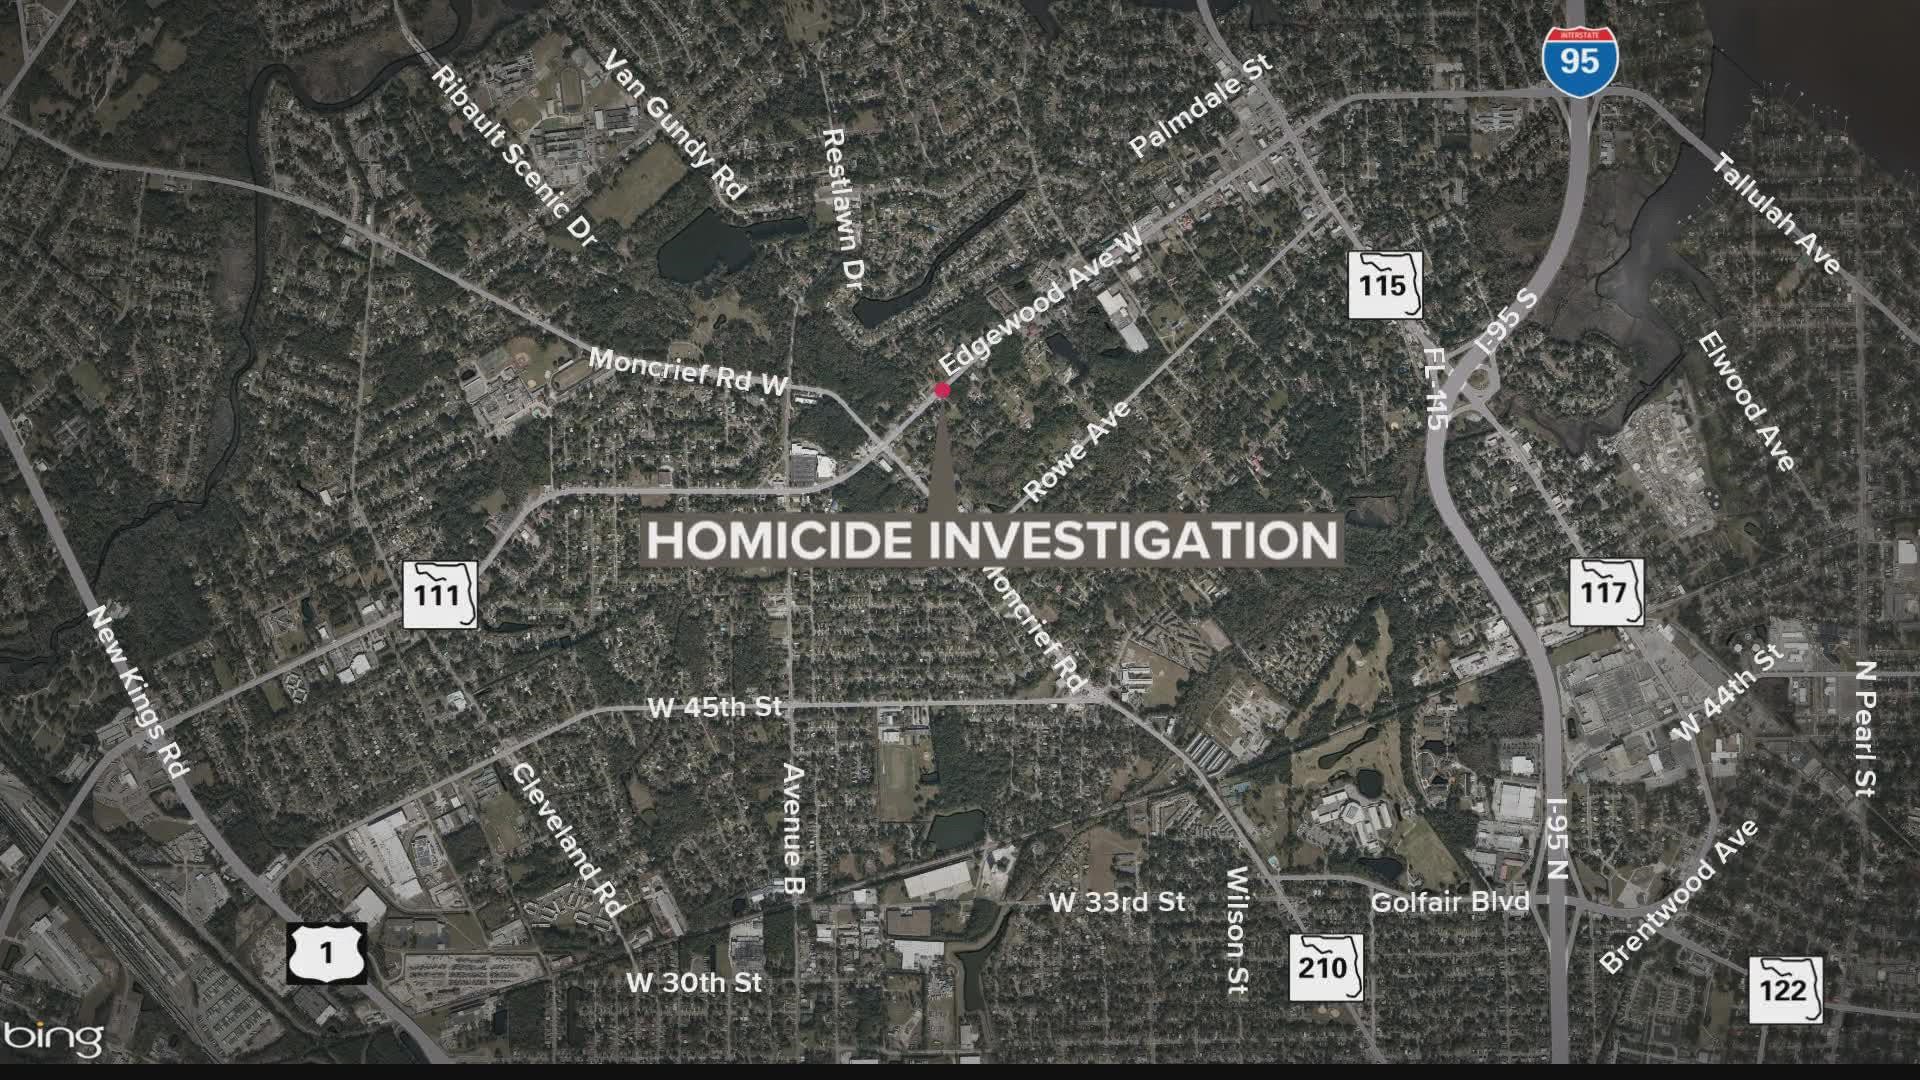 A group of five men shot at the victim, who died at the hospital, the Jacksonville Sheriff's Office said.